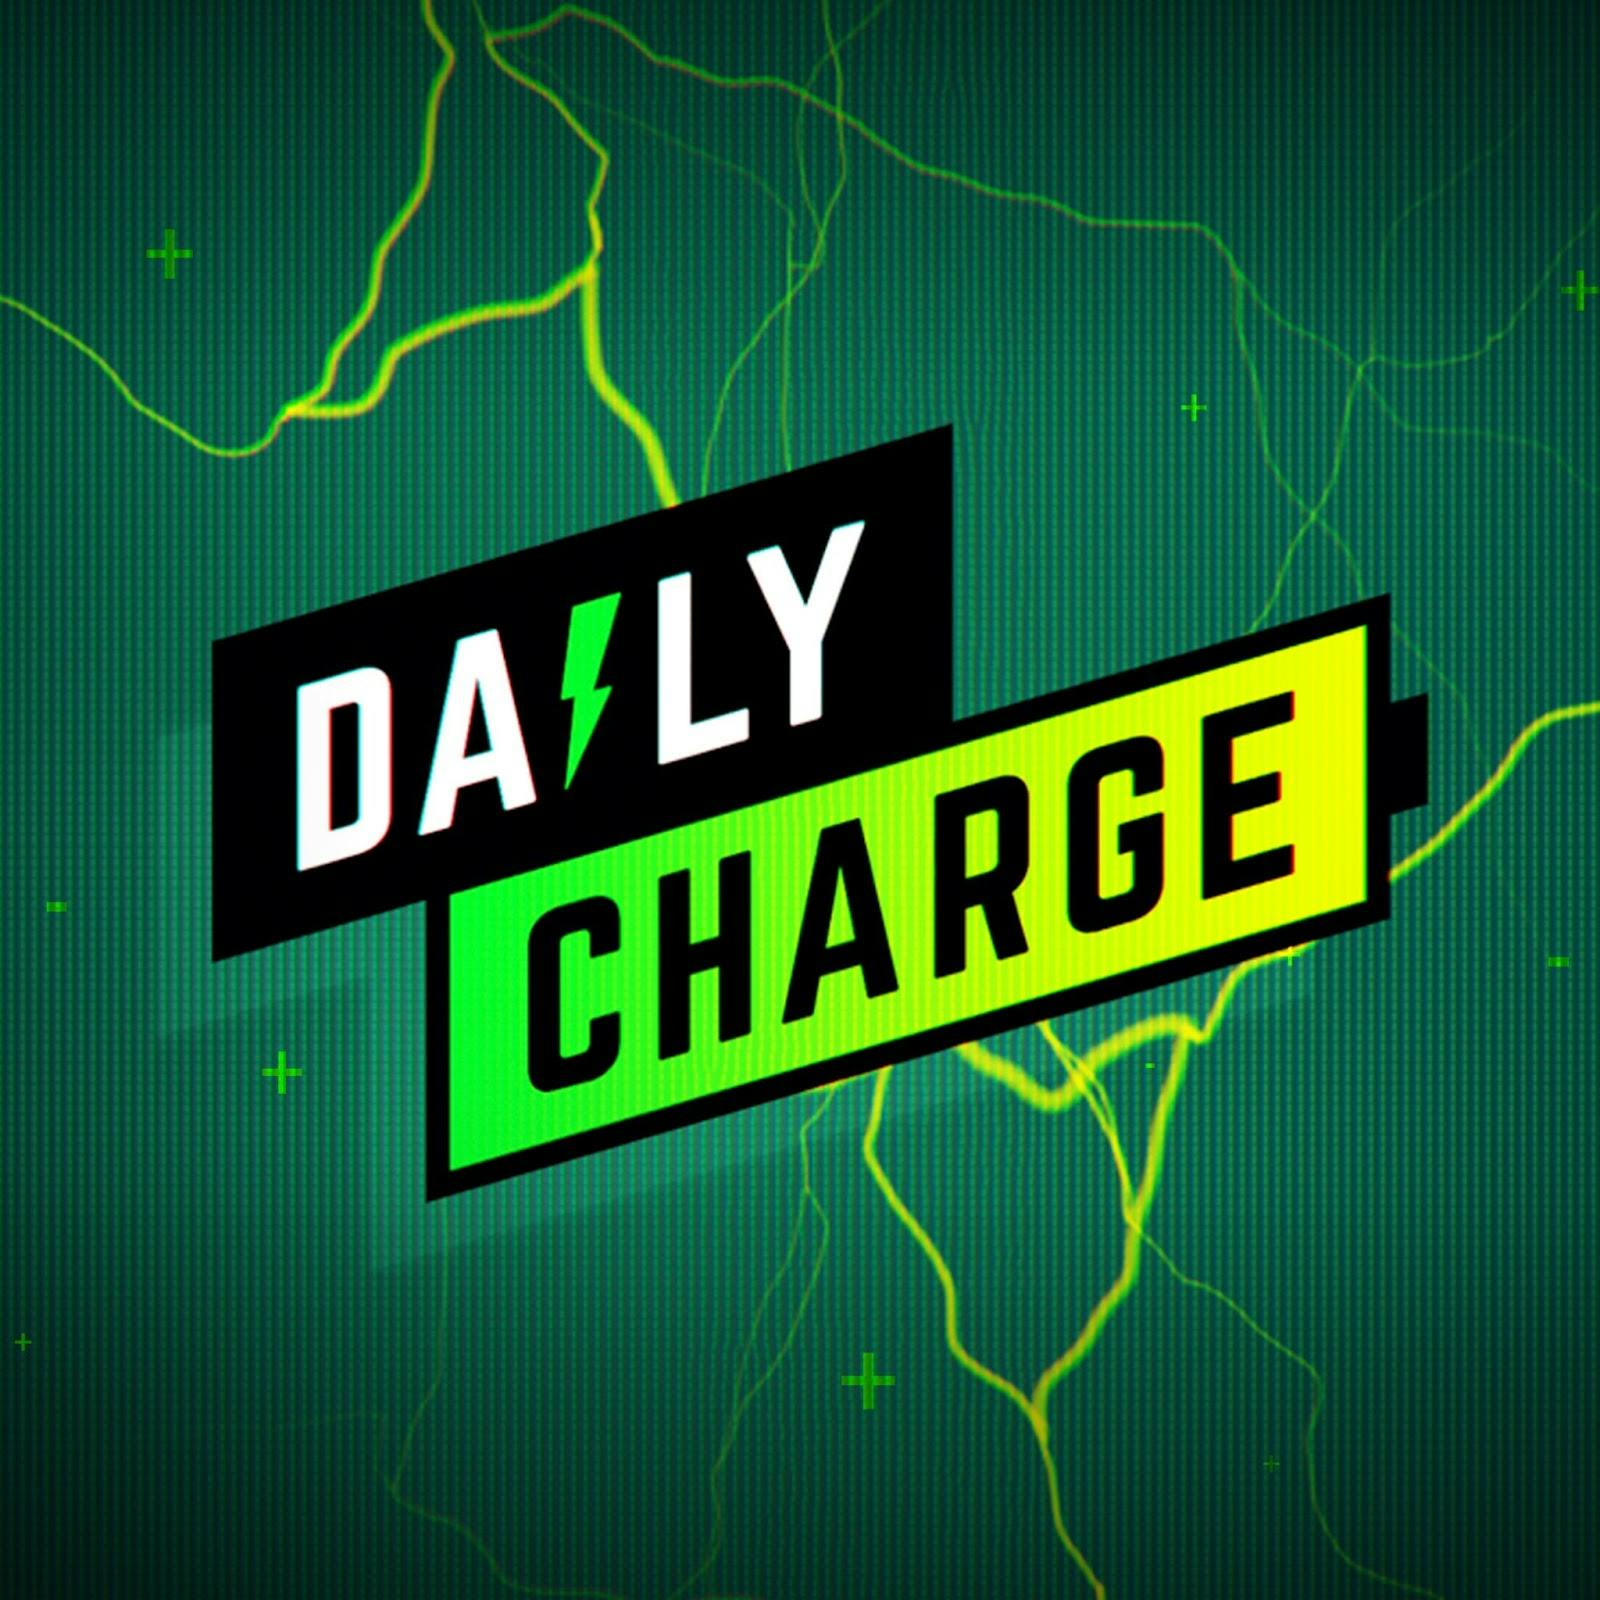 What Prime Day Looks Like in the Age of High Inflation (Daily Charge 7/8/2022